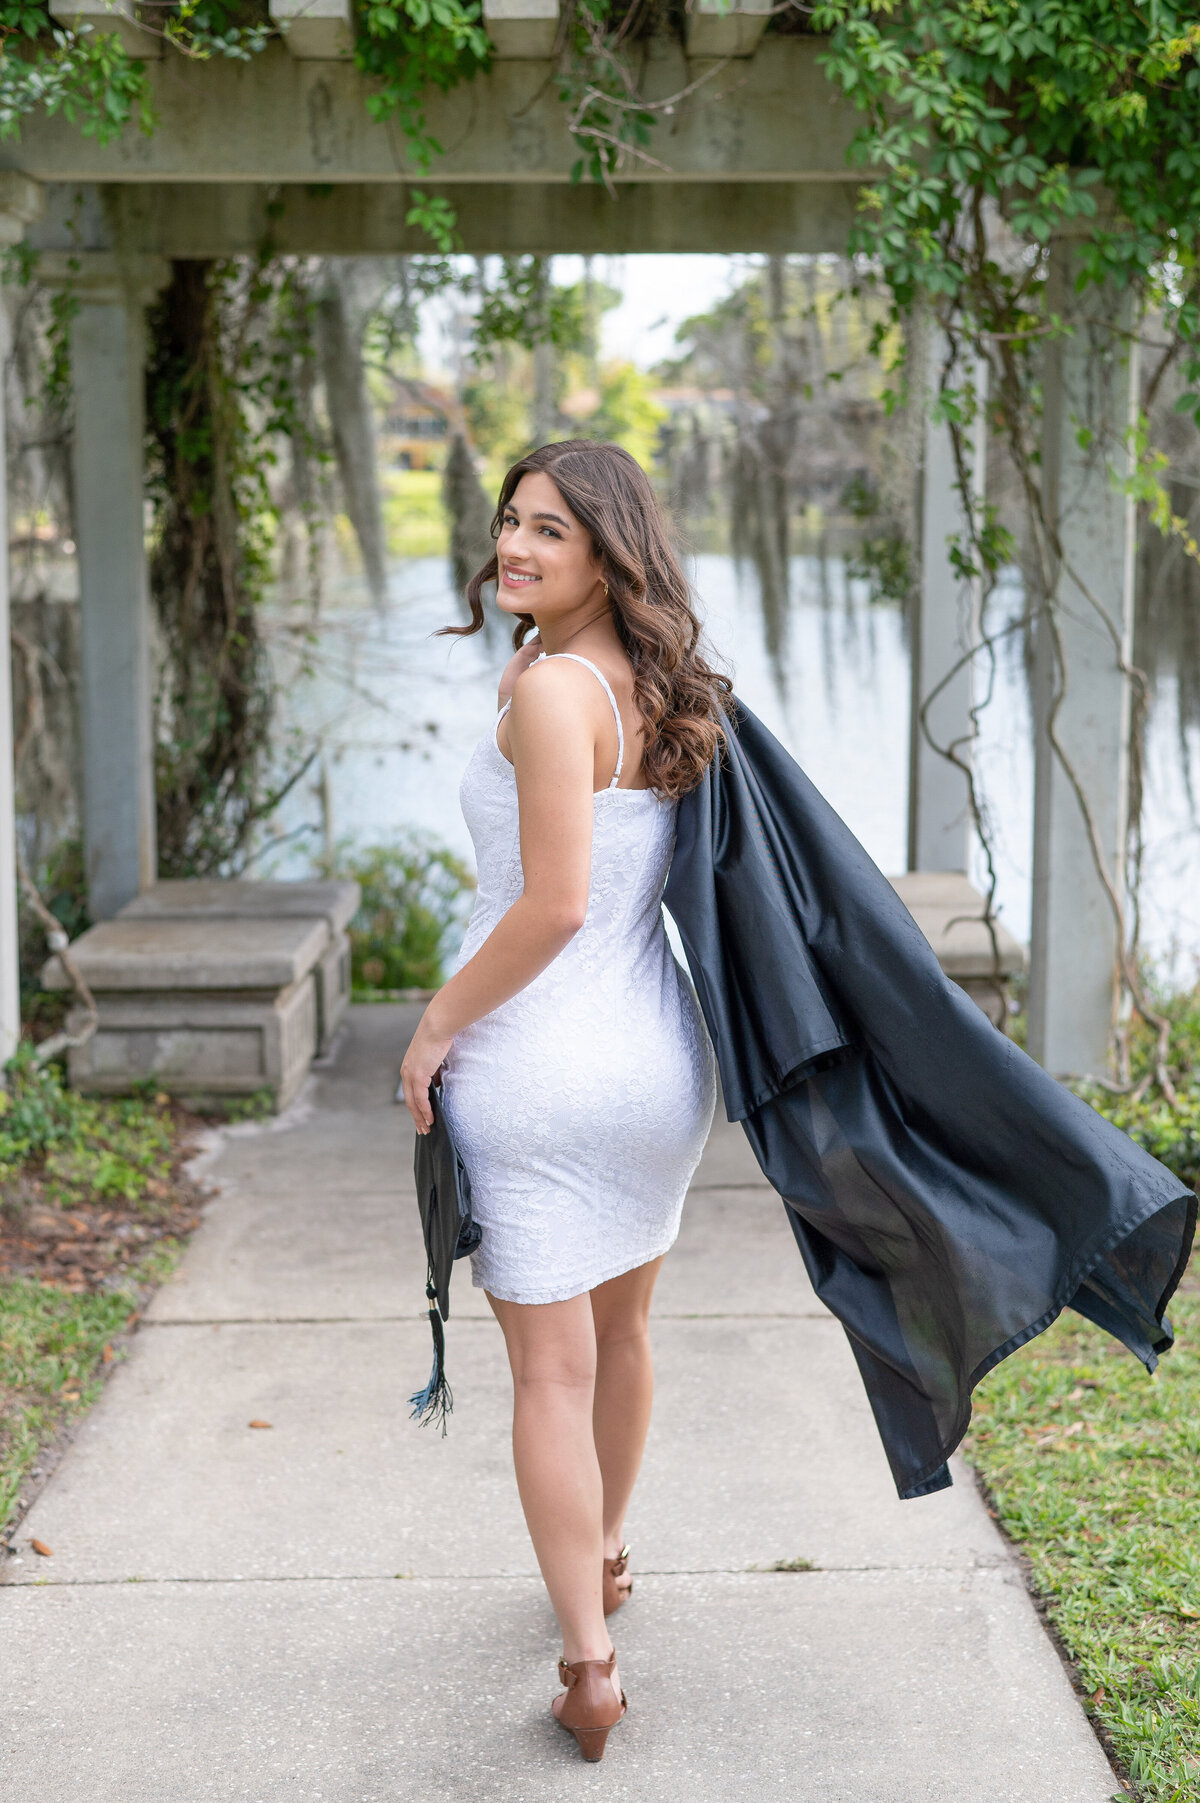 High school senior girl holding cap and gown looks back at camera smiling.